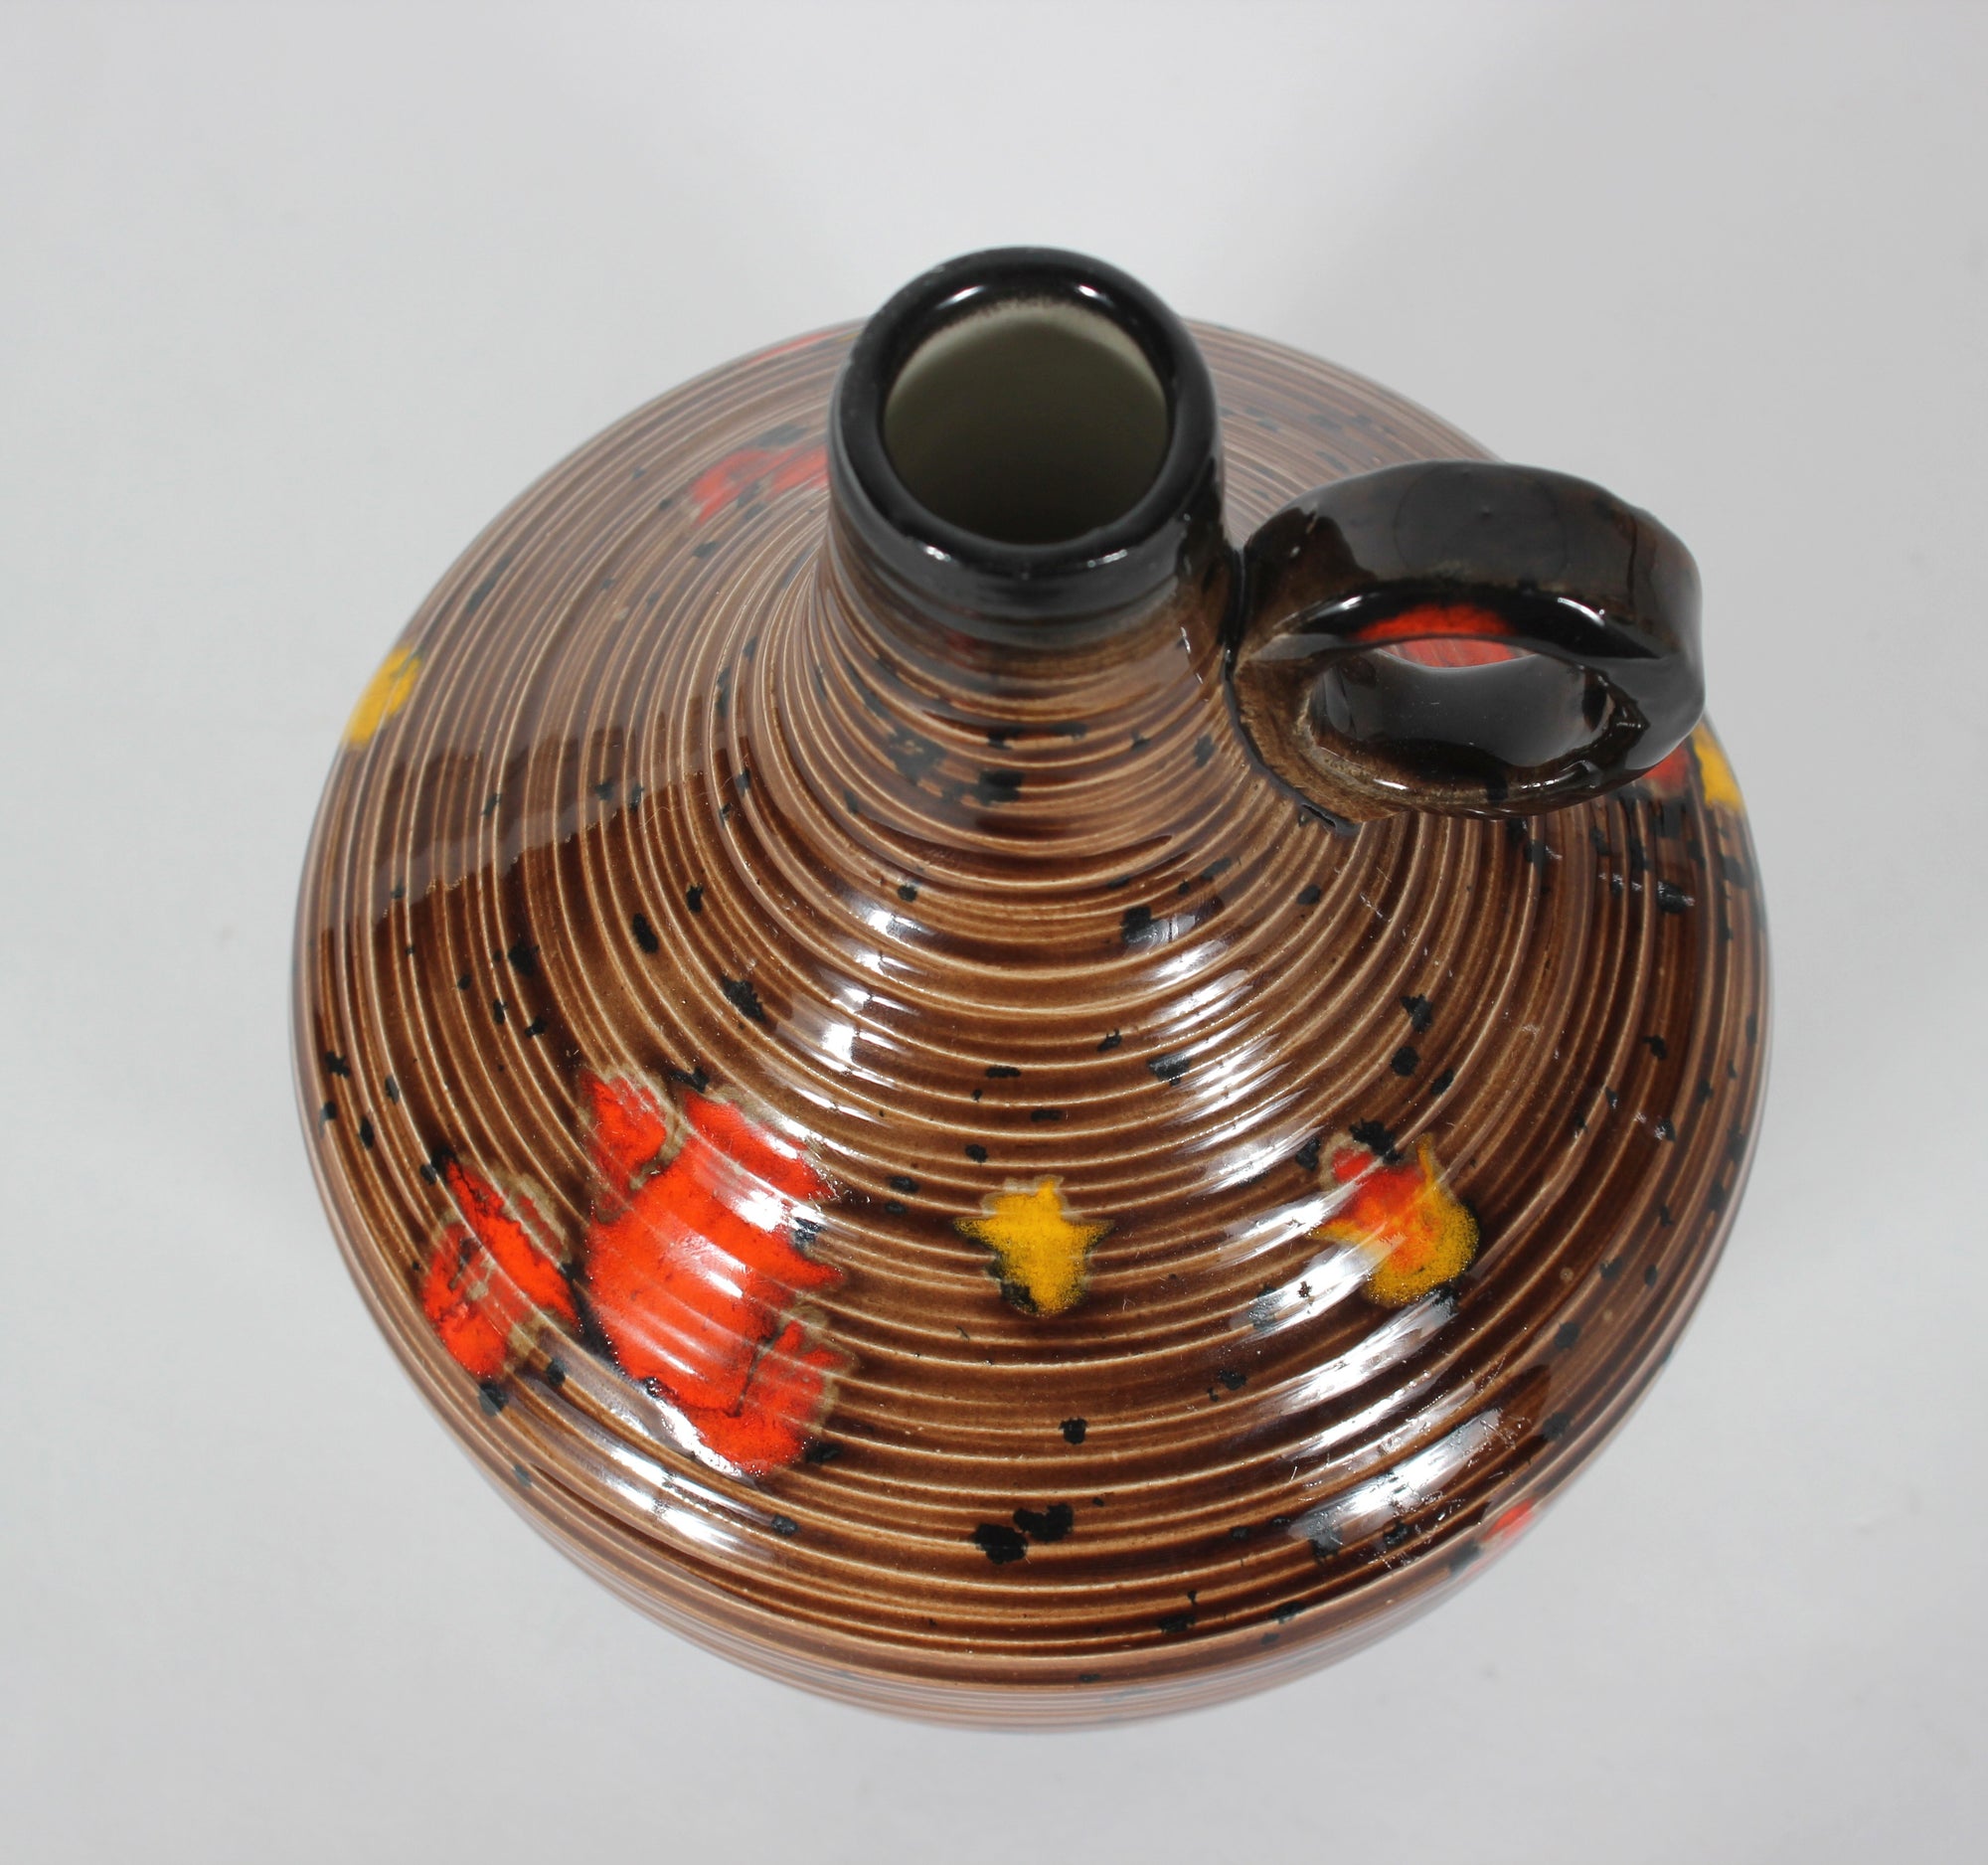 Mid Century Ceramic Gourd Vase with Striped Pattern & Red Accents <br><br>#47968